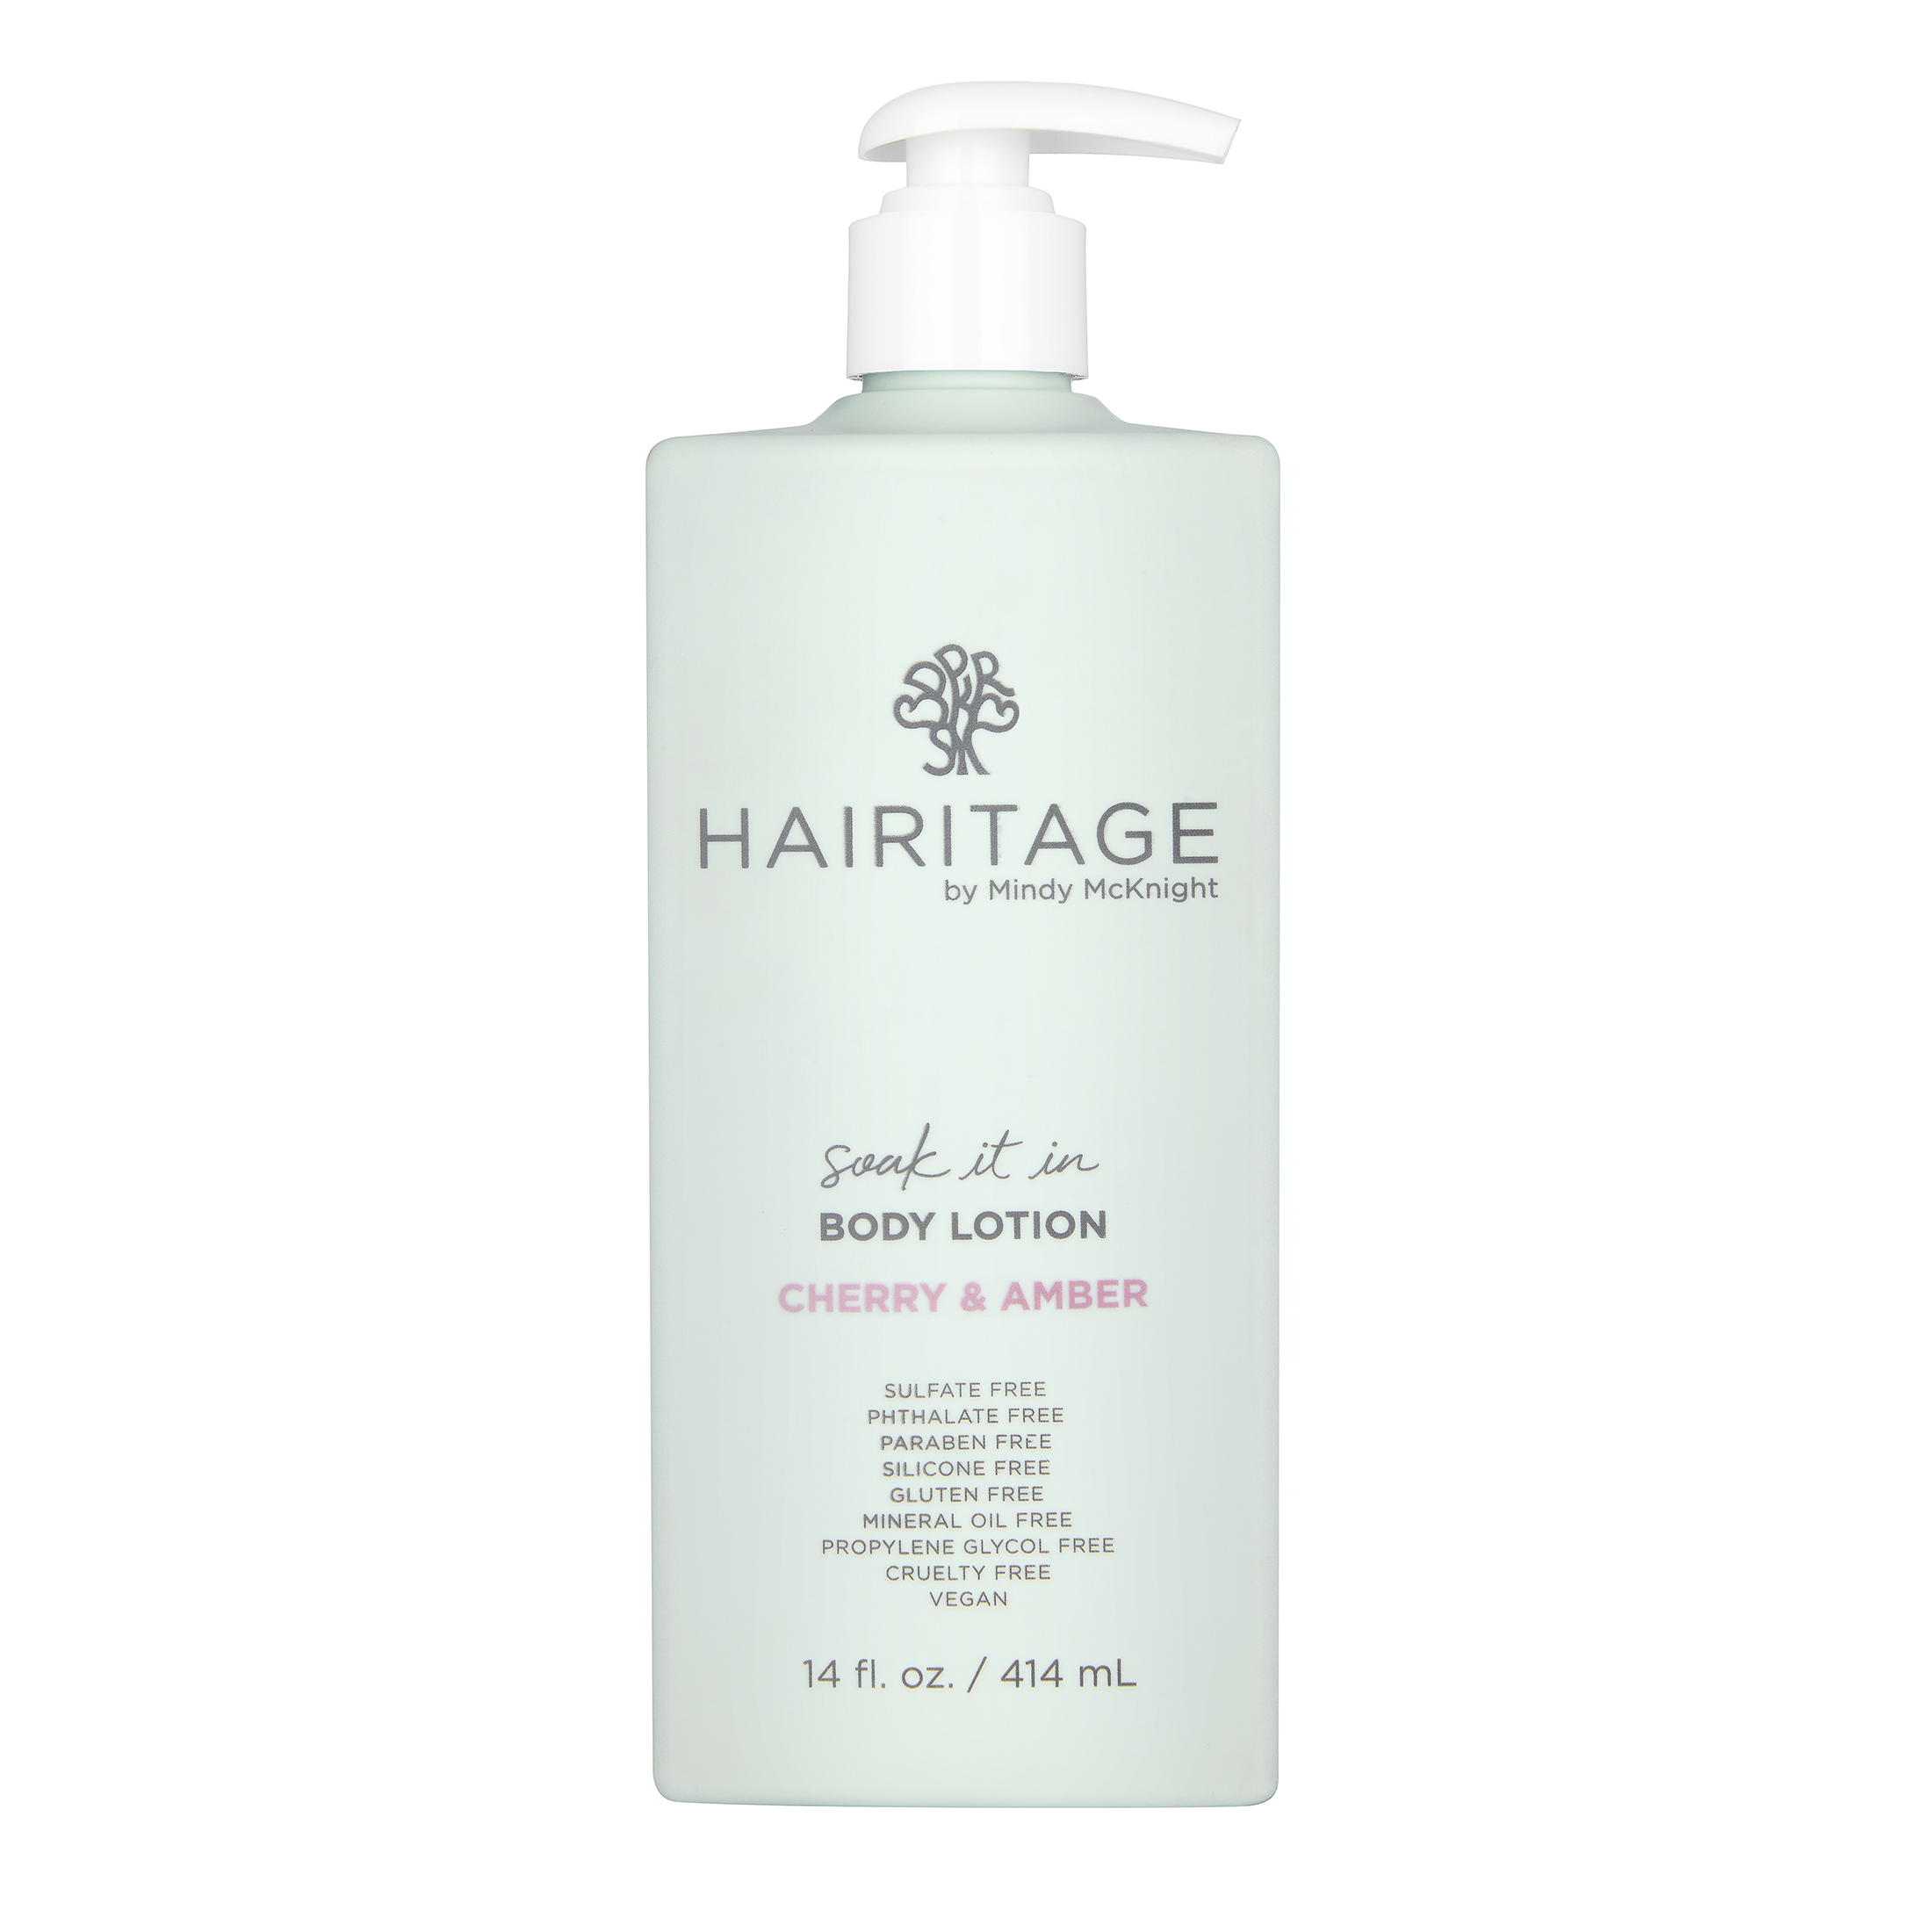 Hairitage Soak it In Cherry & Amber Scented Body Lotion | Niacinamide, Jojoba Oil, & Avocado Oil for All Skin Types | Vetiver & Guaiac Wood Essential Oils, 14 fl. oz. - image 1 of 8